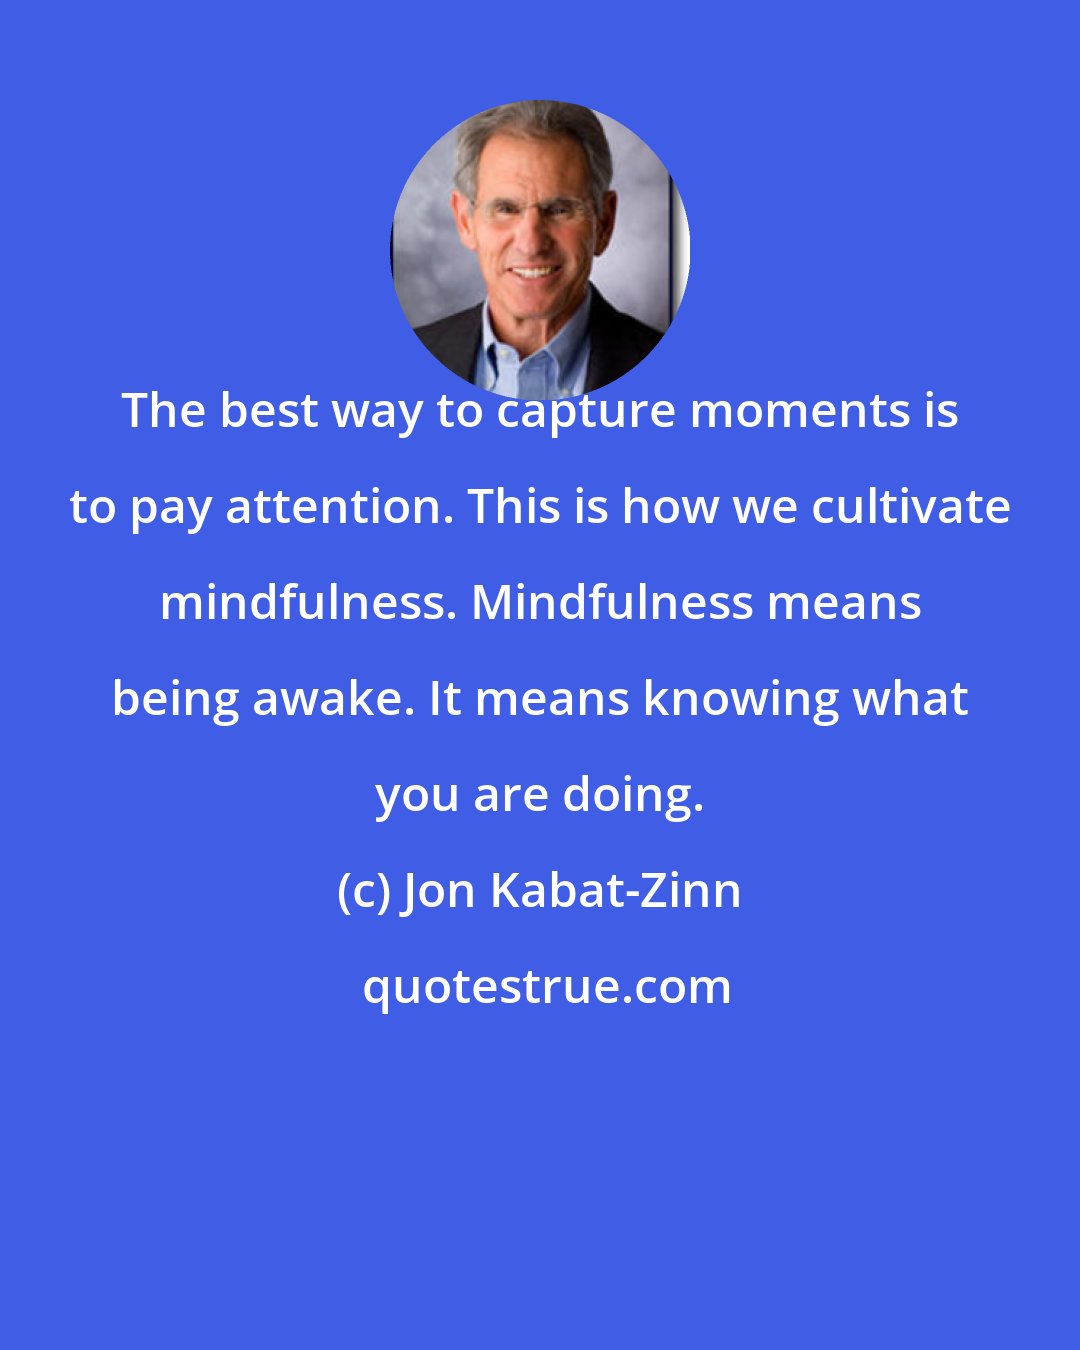 Jon Kabat-Zinn: The best way to capture moments is to pay attention. This is how we cultivate mindfulness. Mindfulness means being awake. It means knowing what you are doing.